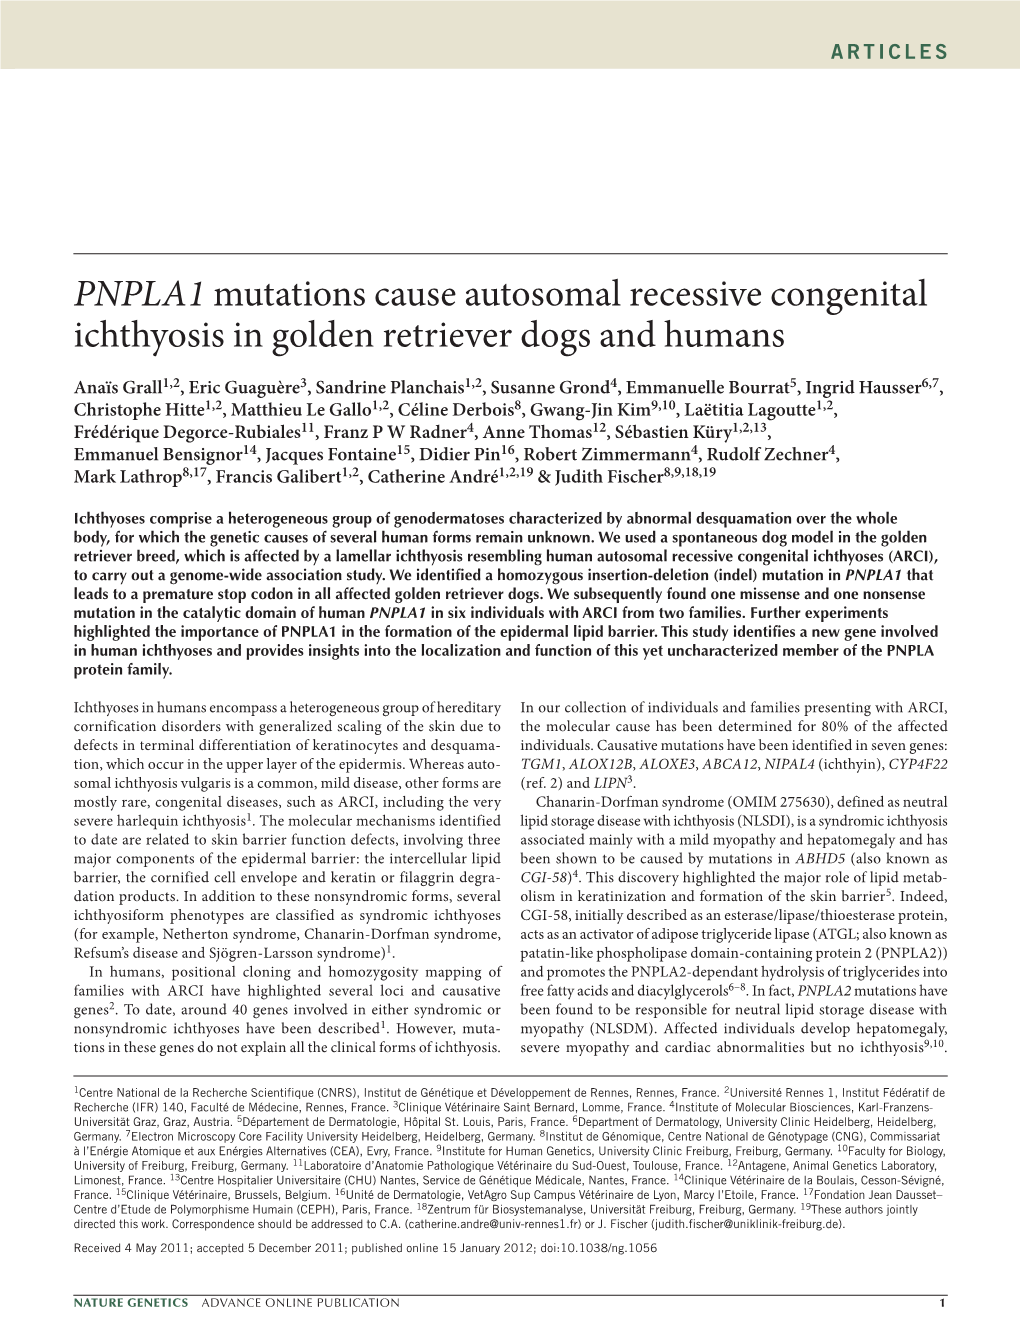 PNPLA1 Mutations Cause Autosomal Recessive Congenital Ichthyosis in Golden Retriever Dogs and Humans